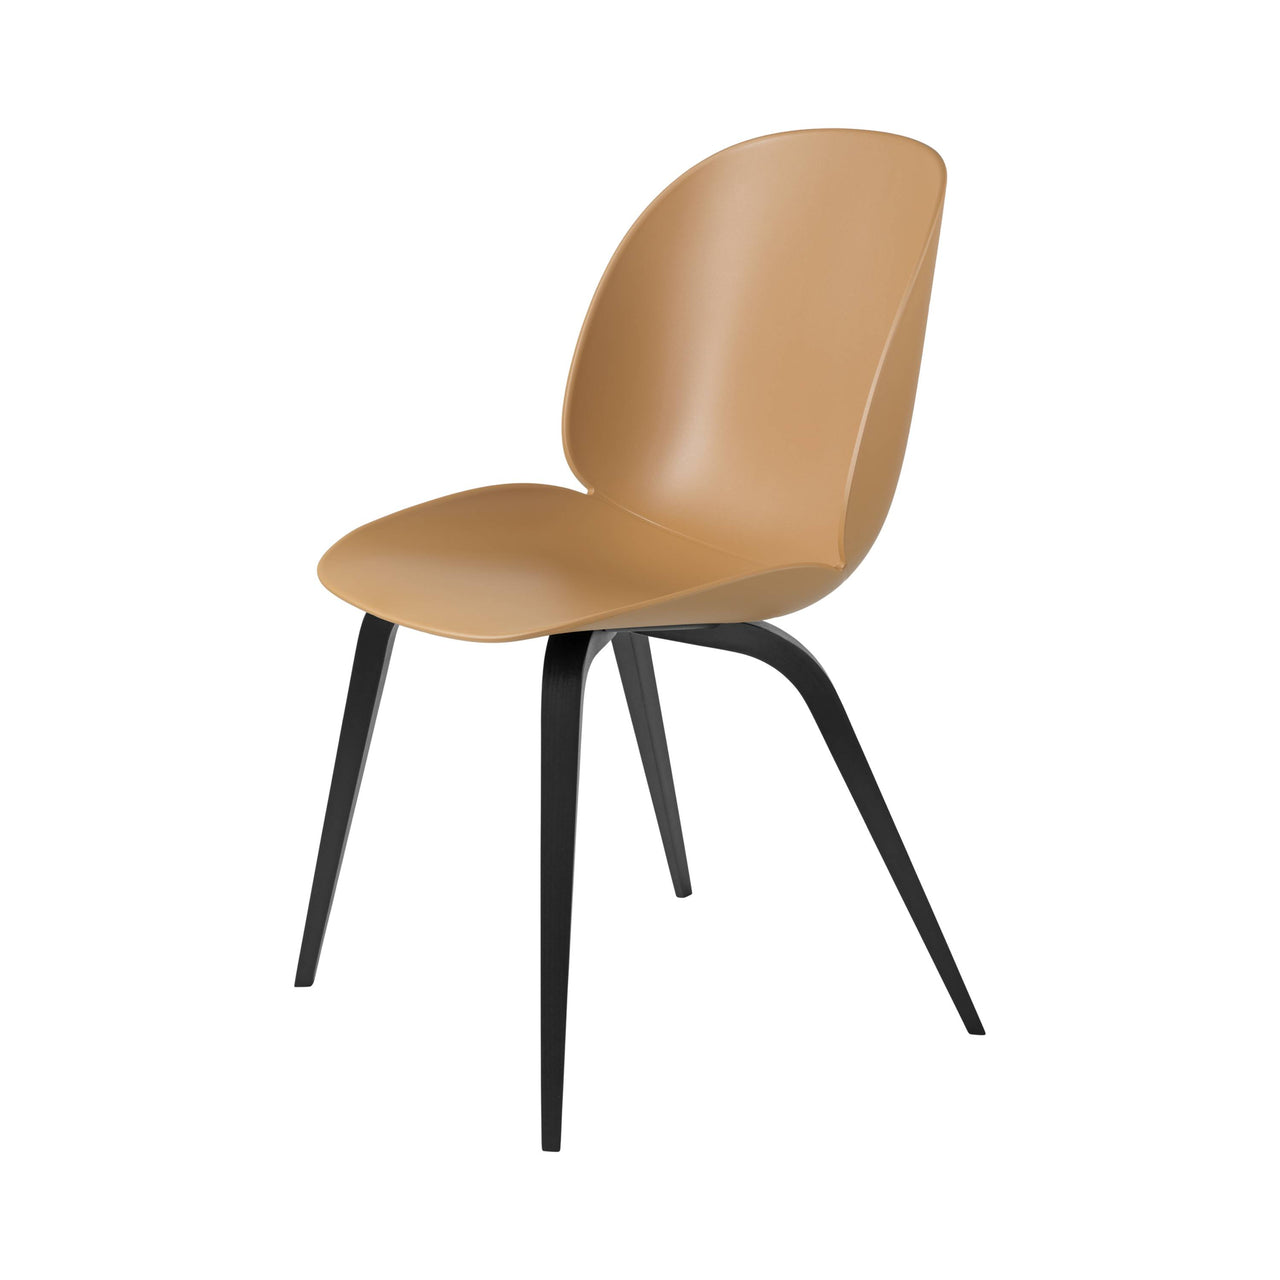 Beetle Dining Chair: Wood Base + Amber Brown + Black Stained Beech + Plastic Glides